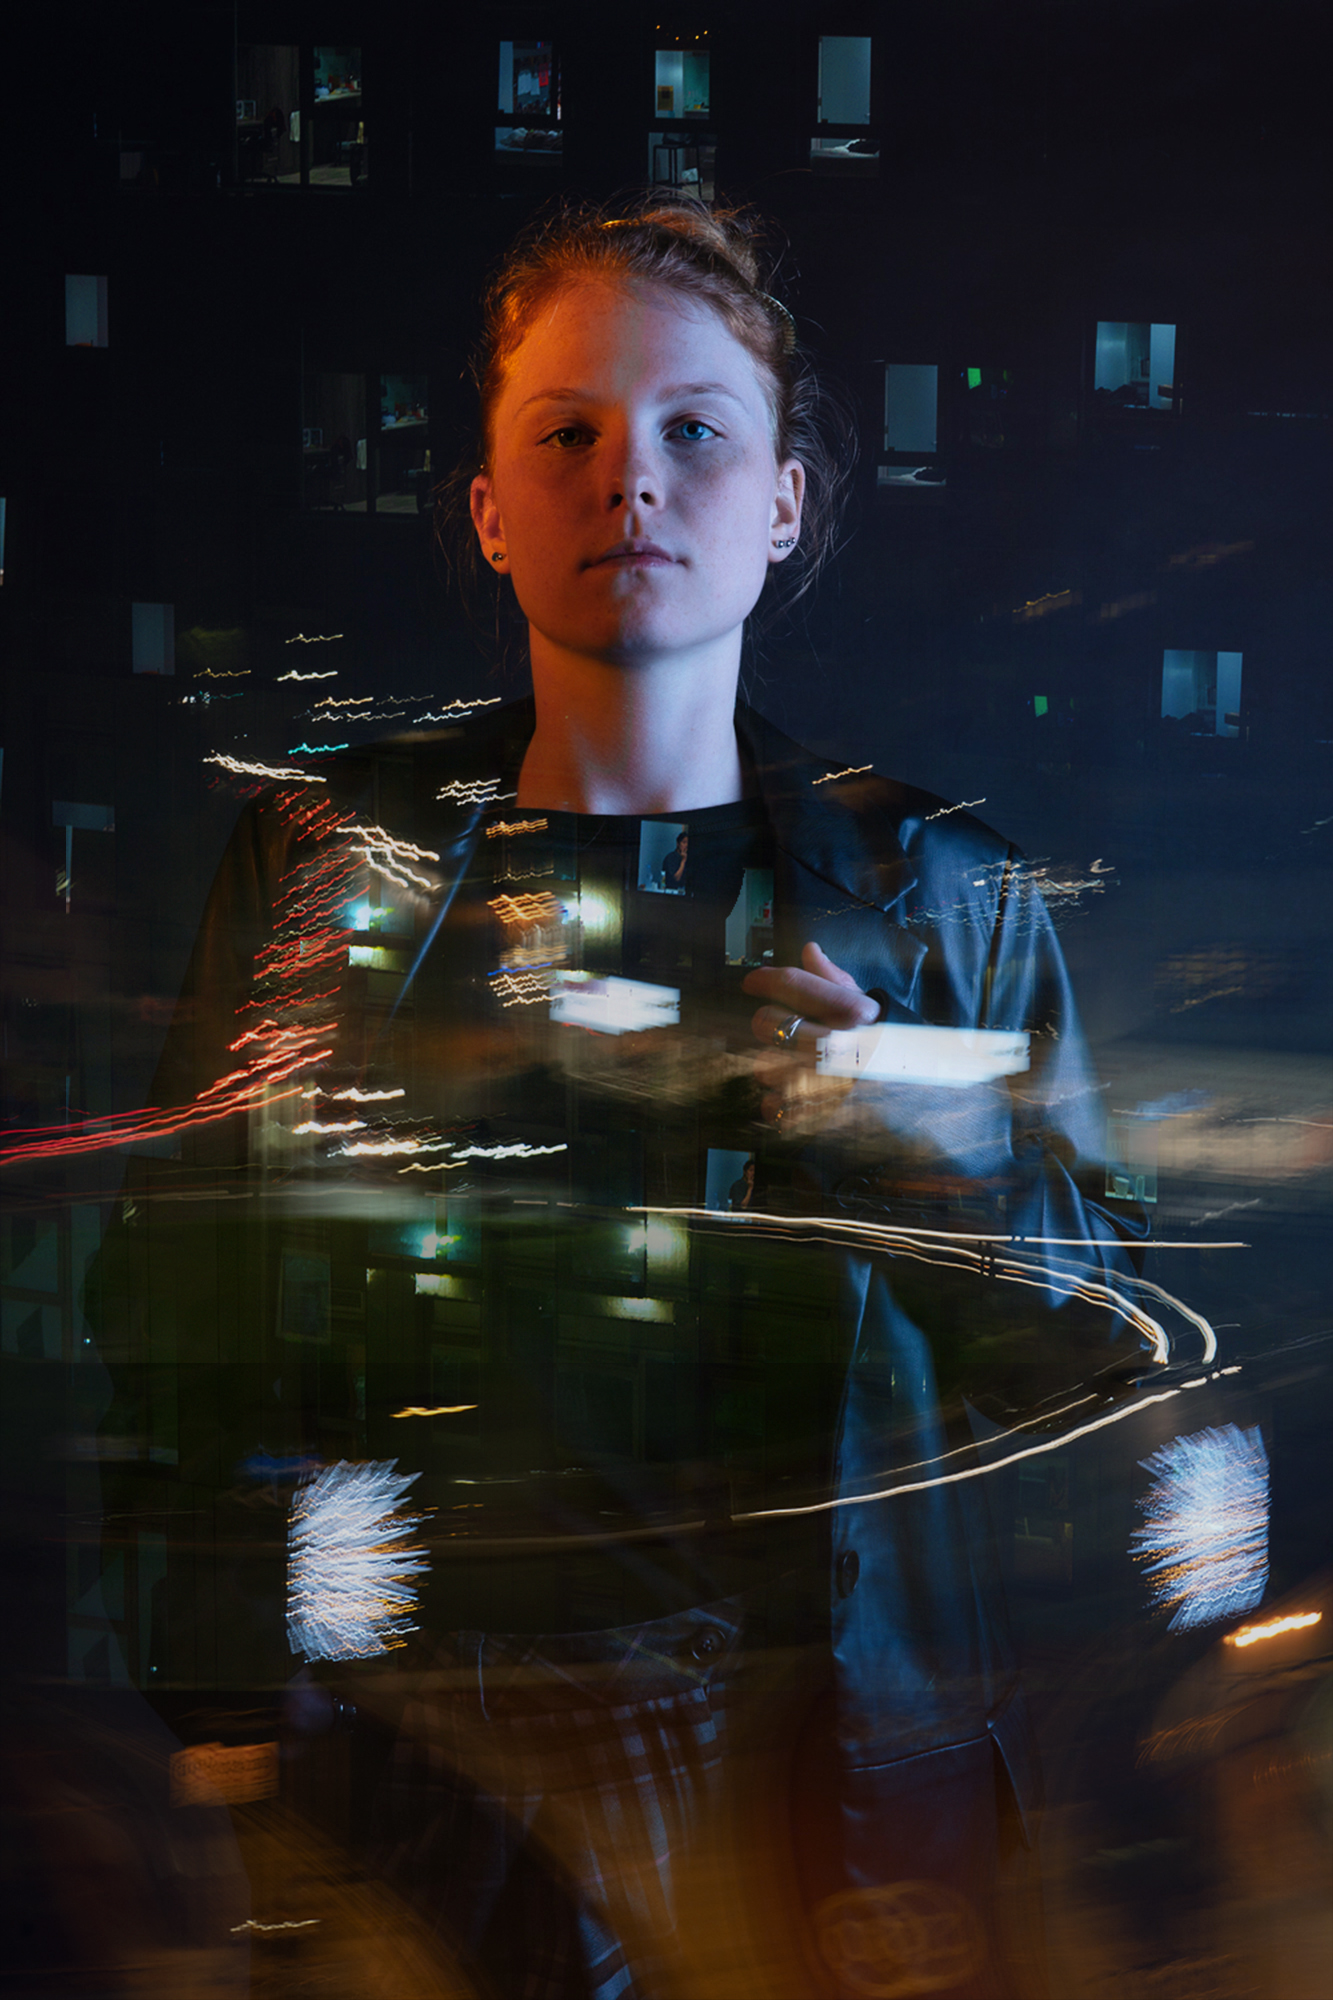 Photography work by Elise Moloney showing a portrait using the double exposure technique with city lights images